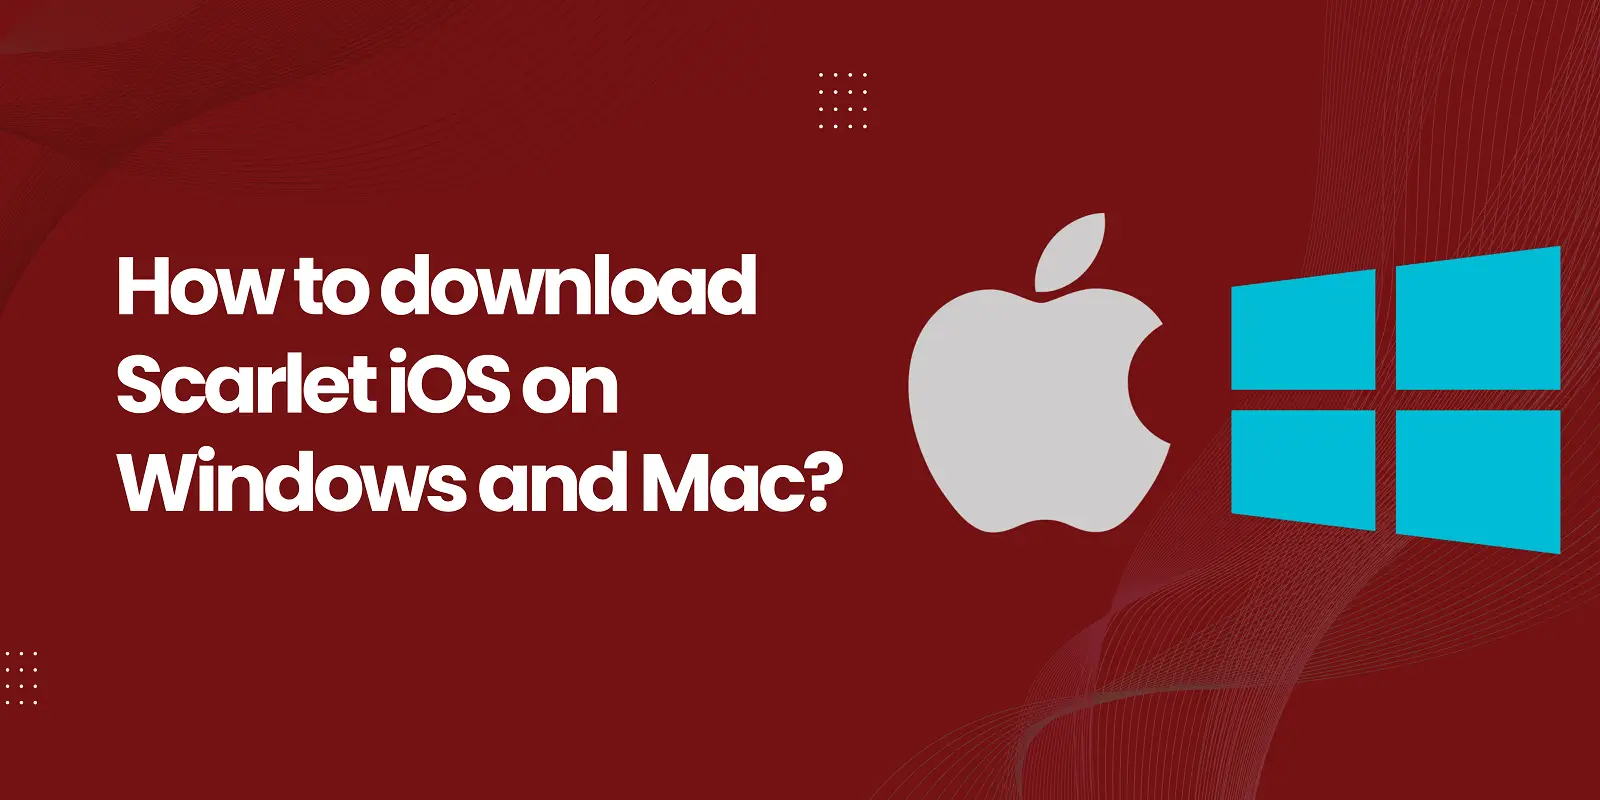 How to download Scarlet iOS on Windows and Mac?